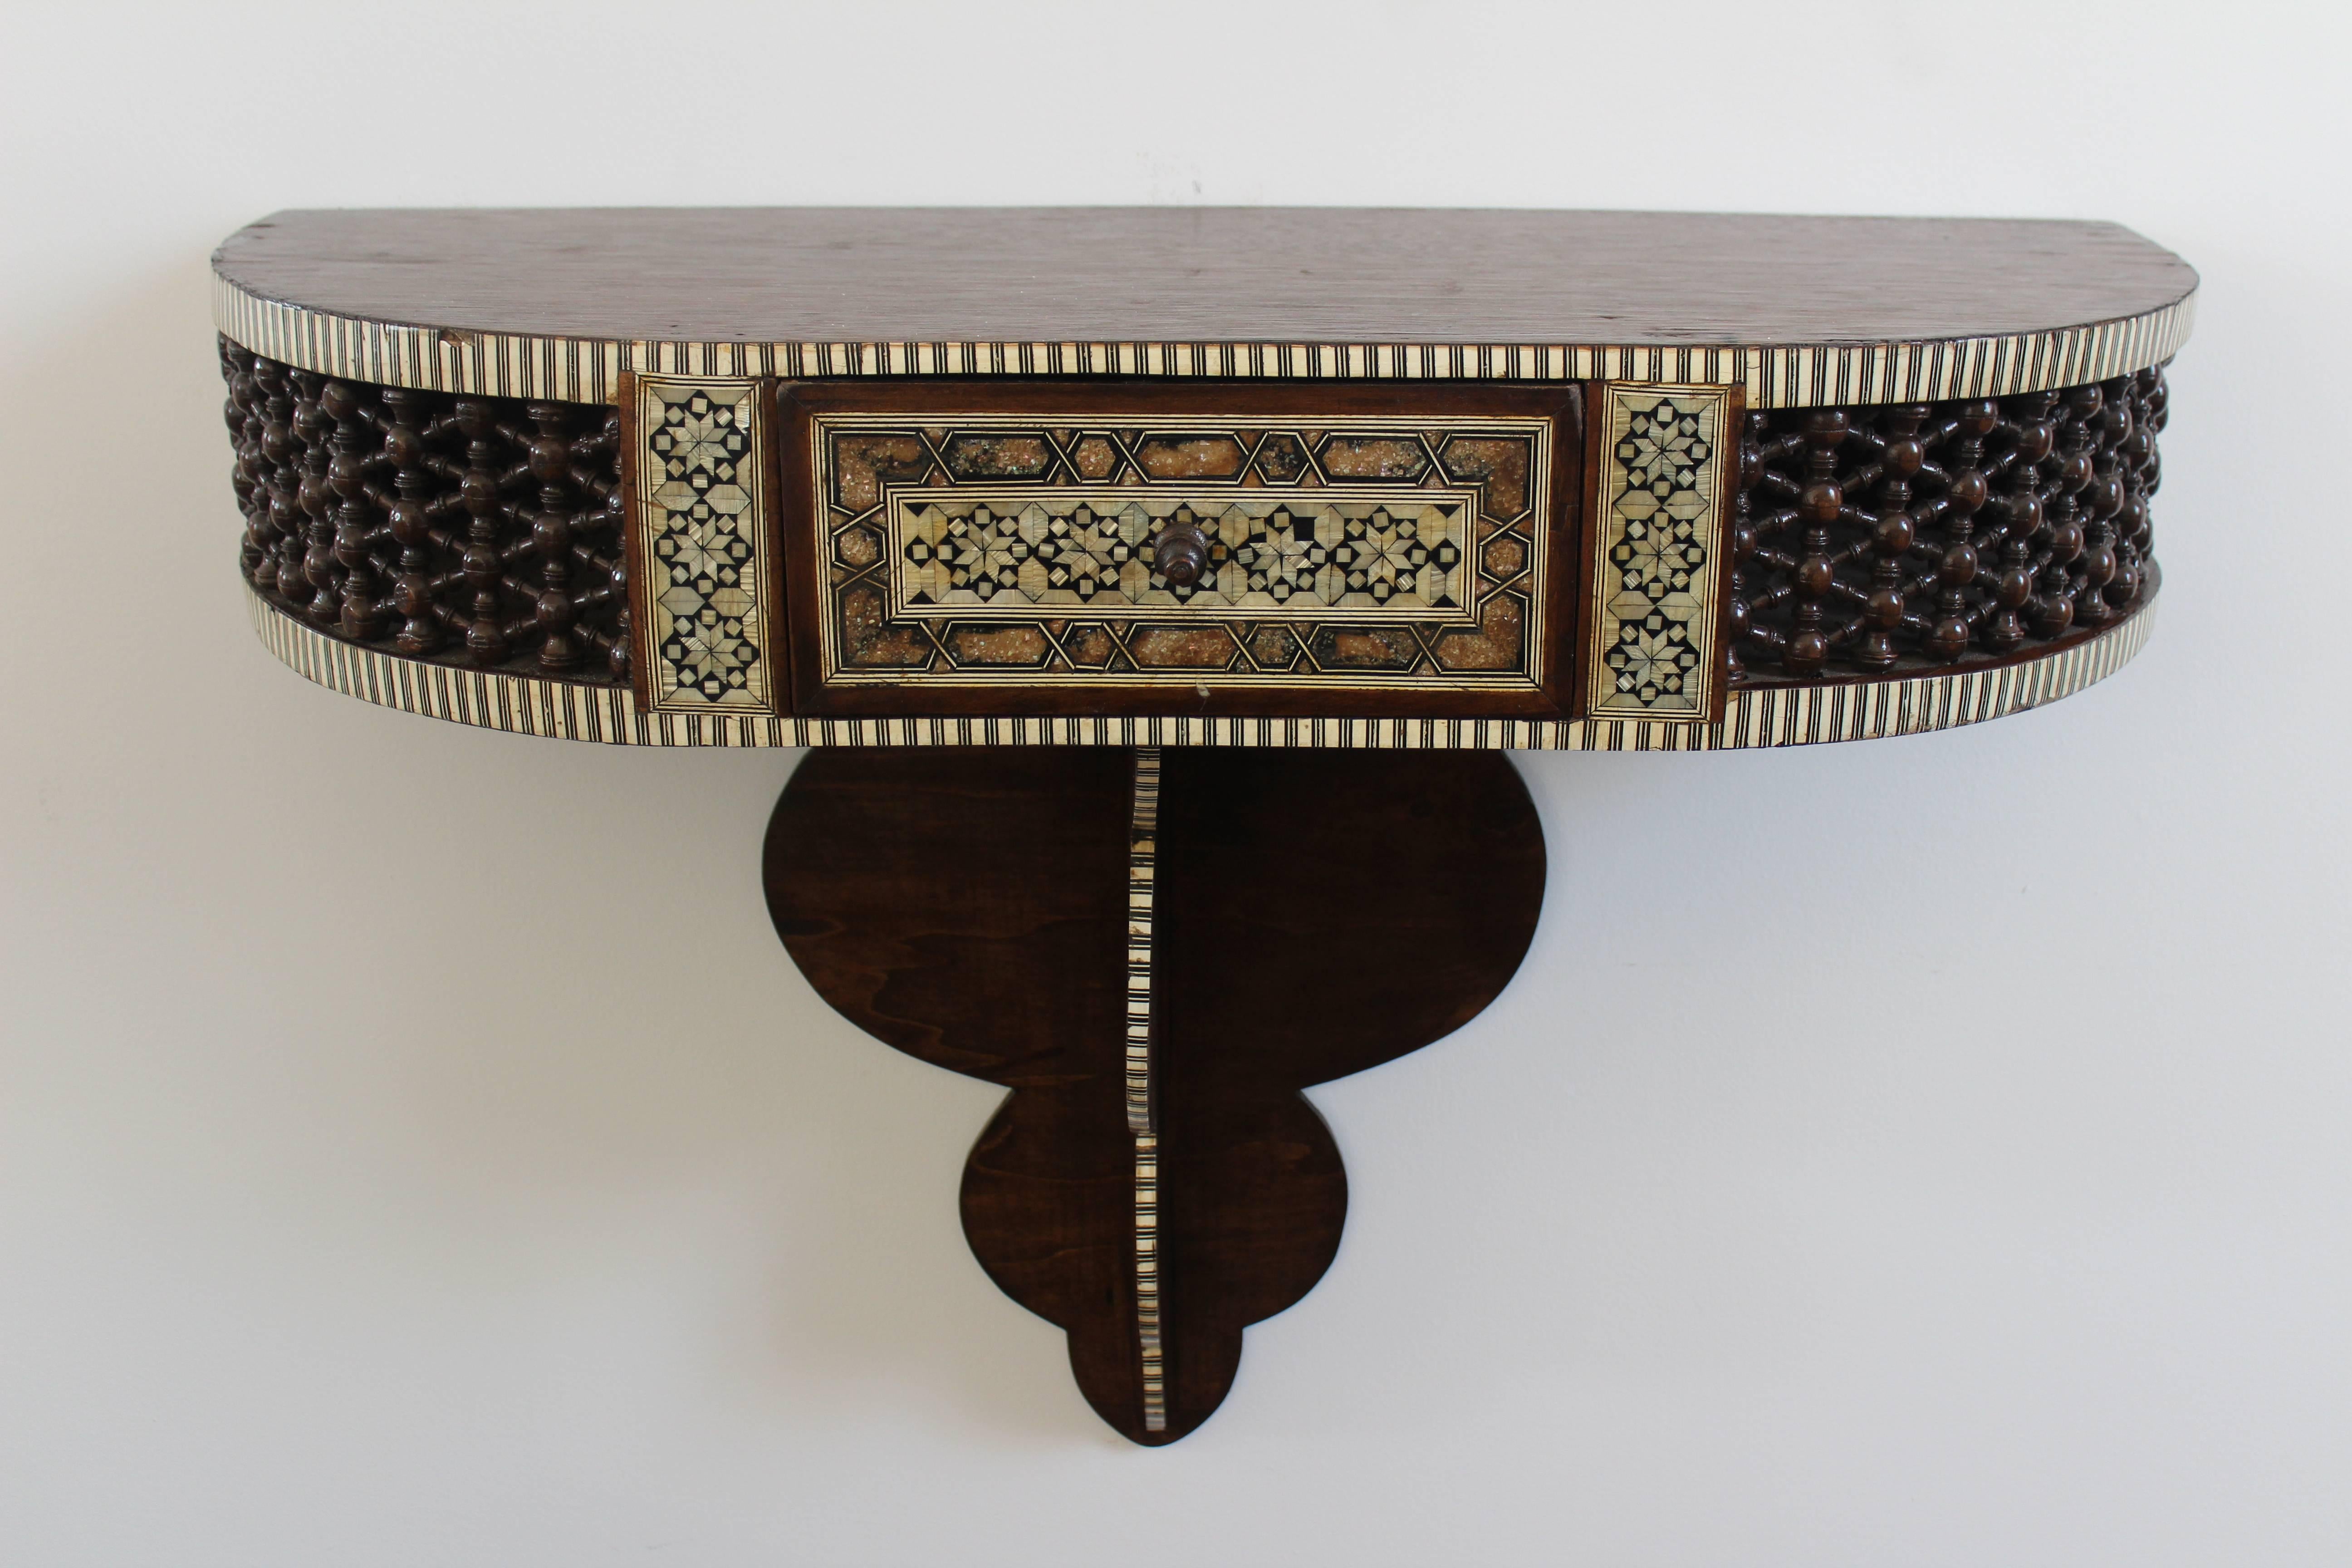 Antique Syrian wall console with a single drawer, perfect for an entry way, hallway or small space. Made of walnut and adorned with inlay mother-of-pearl. This piece has been recently refinished but still retains minor signs of wear. Includes